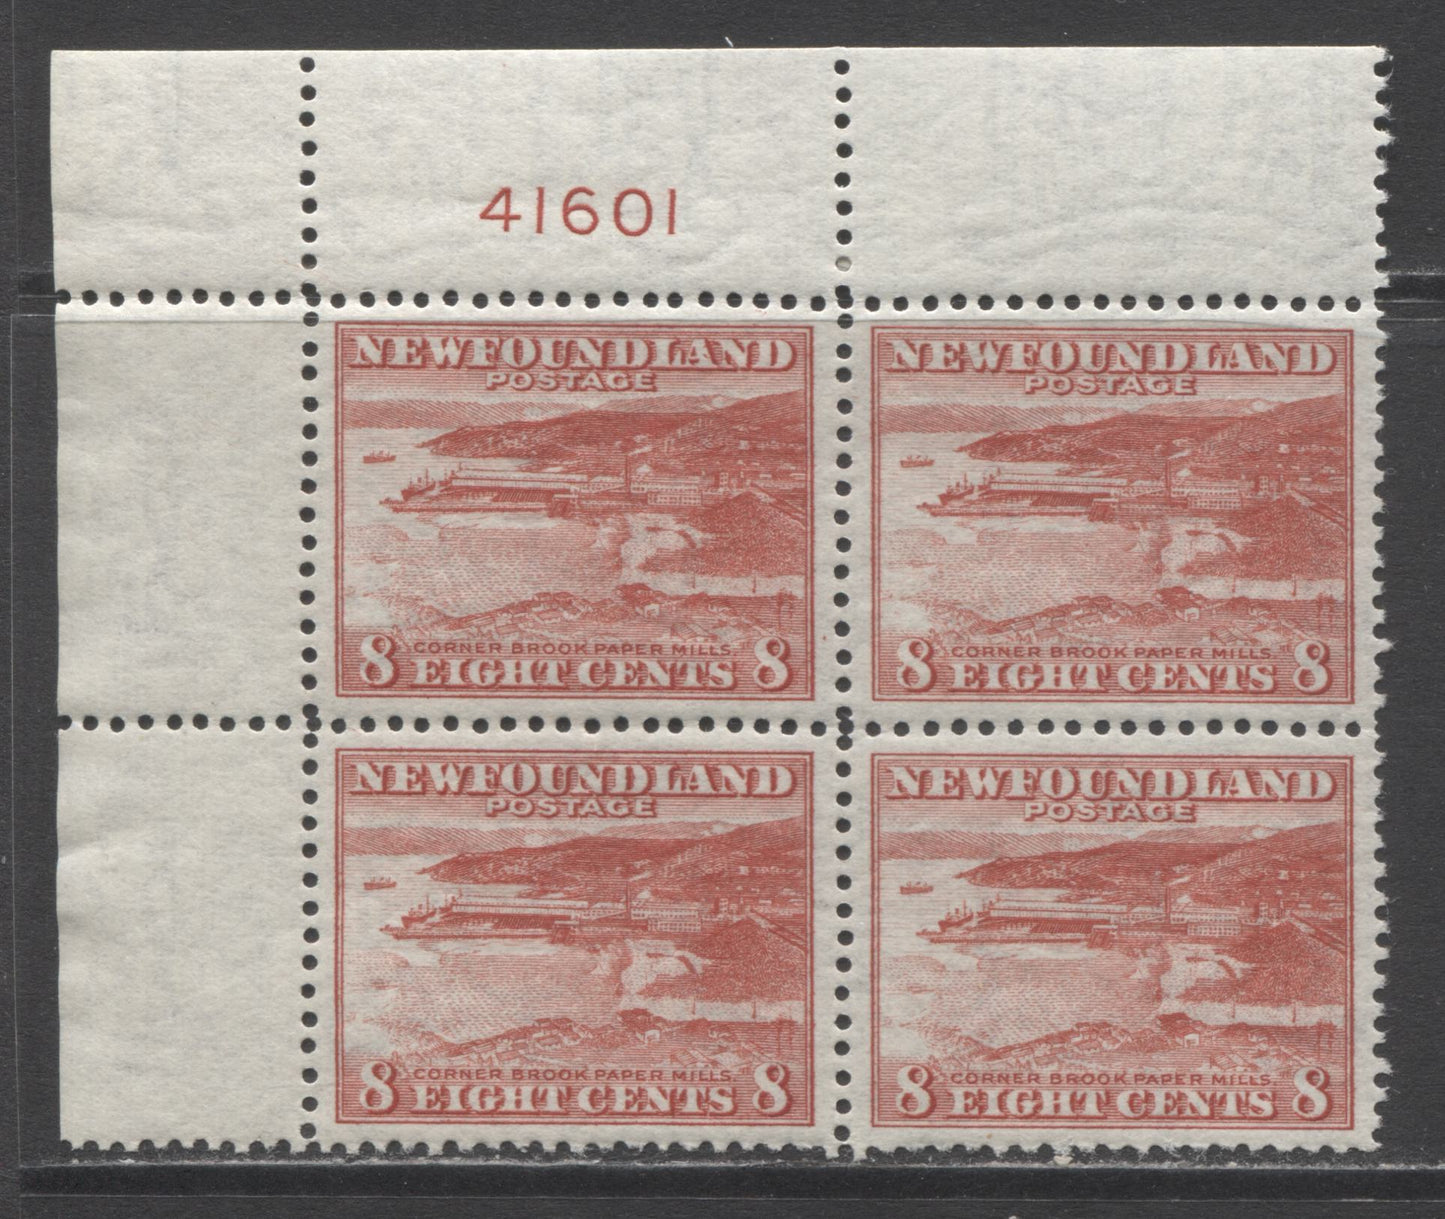 Lot 217 Newfoundland #259 8c Red Corner Brook Paper Mill, 1941-1944 Resources Re-Issue, A VFNH UL Plate 41601 Block Of 4